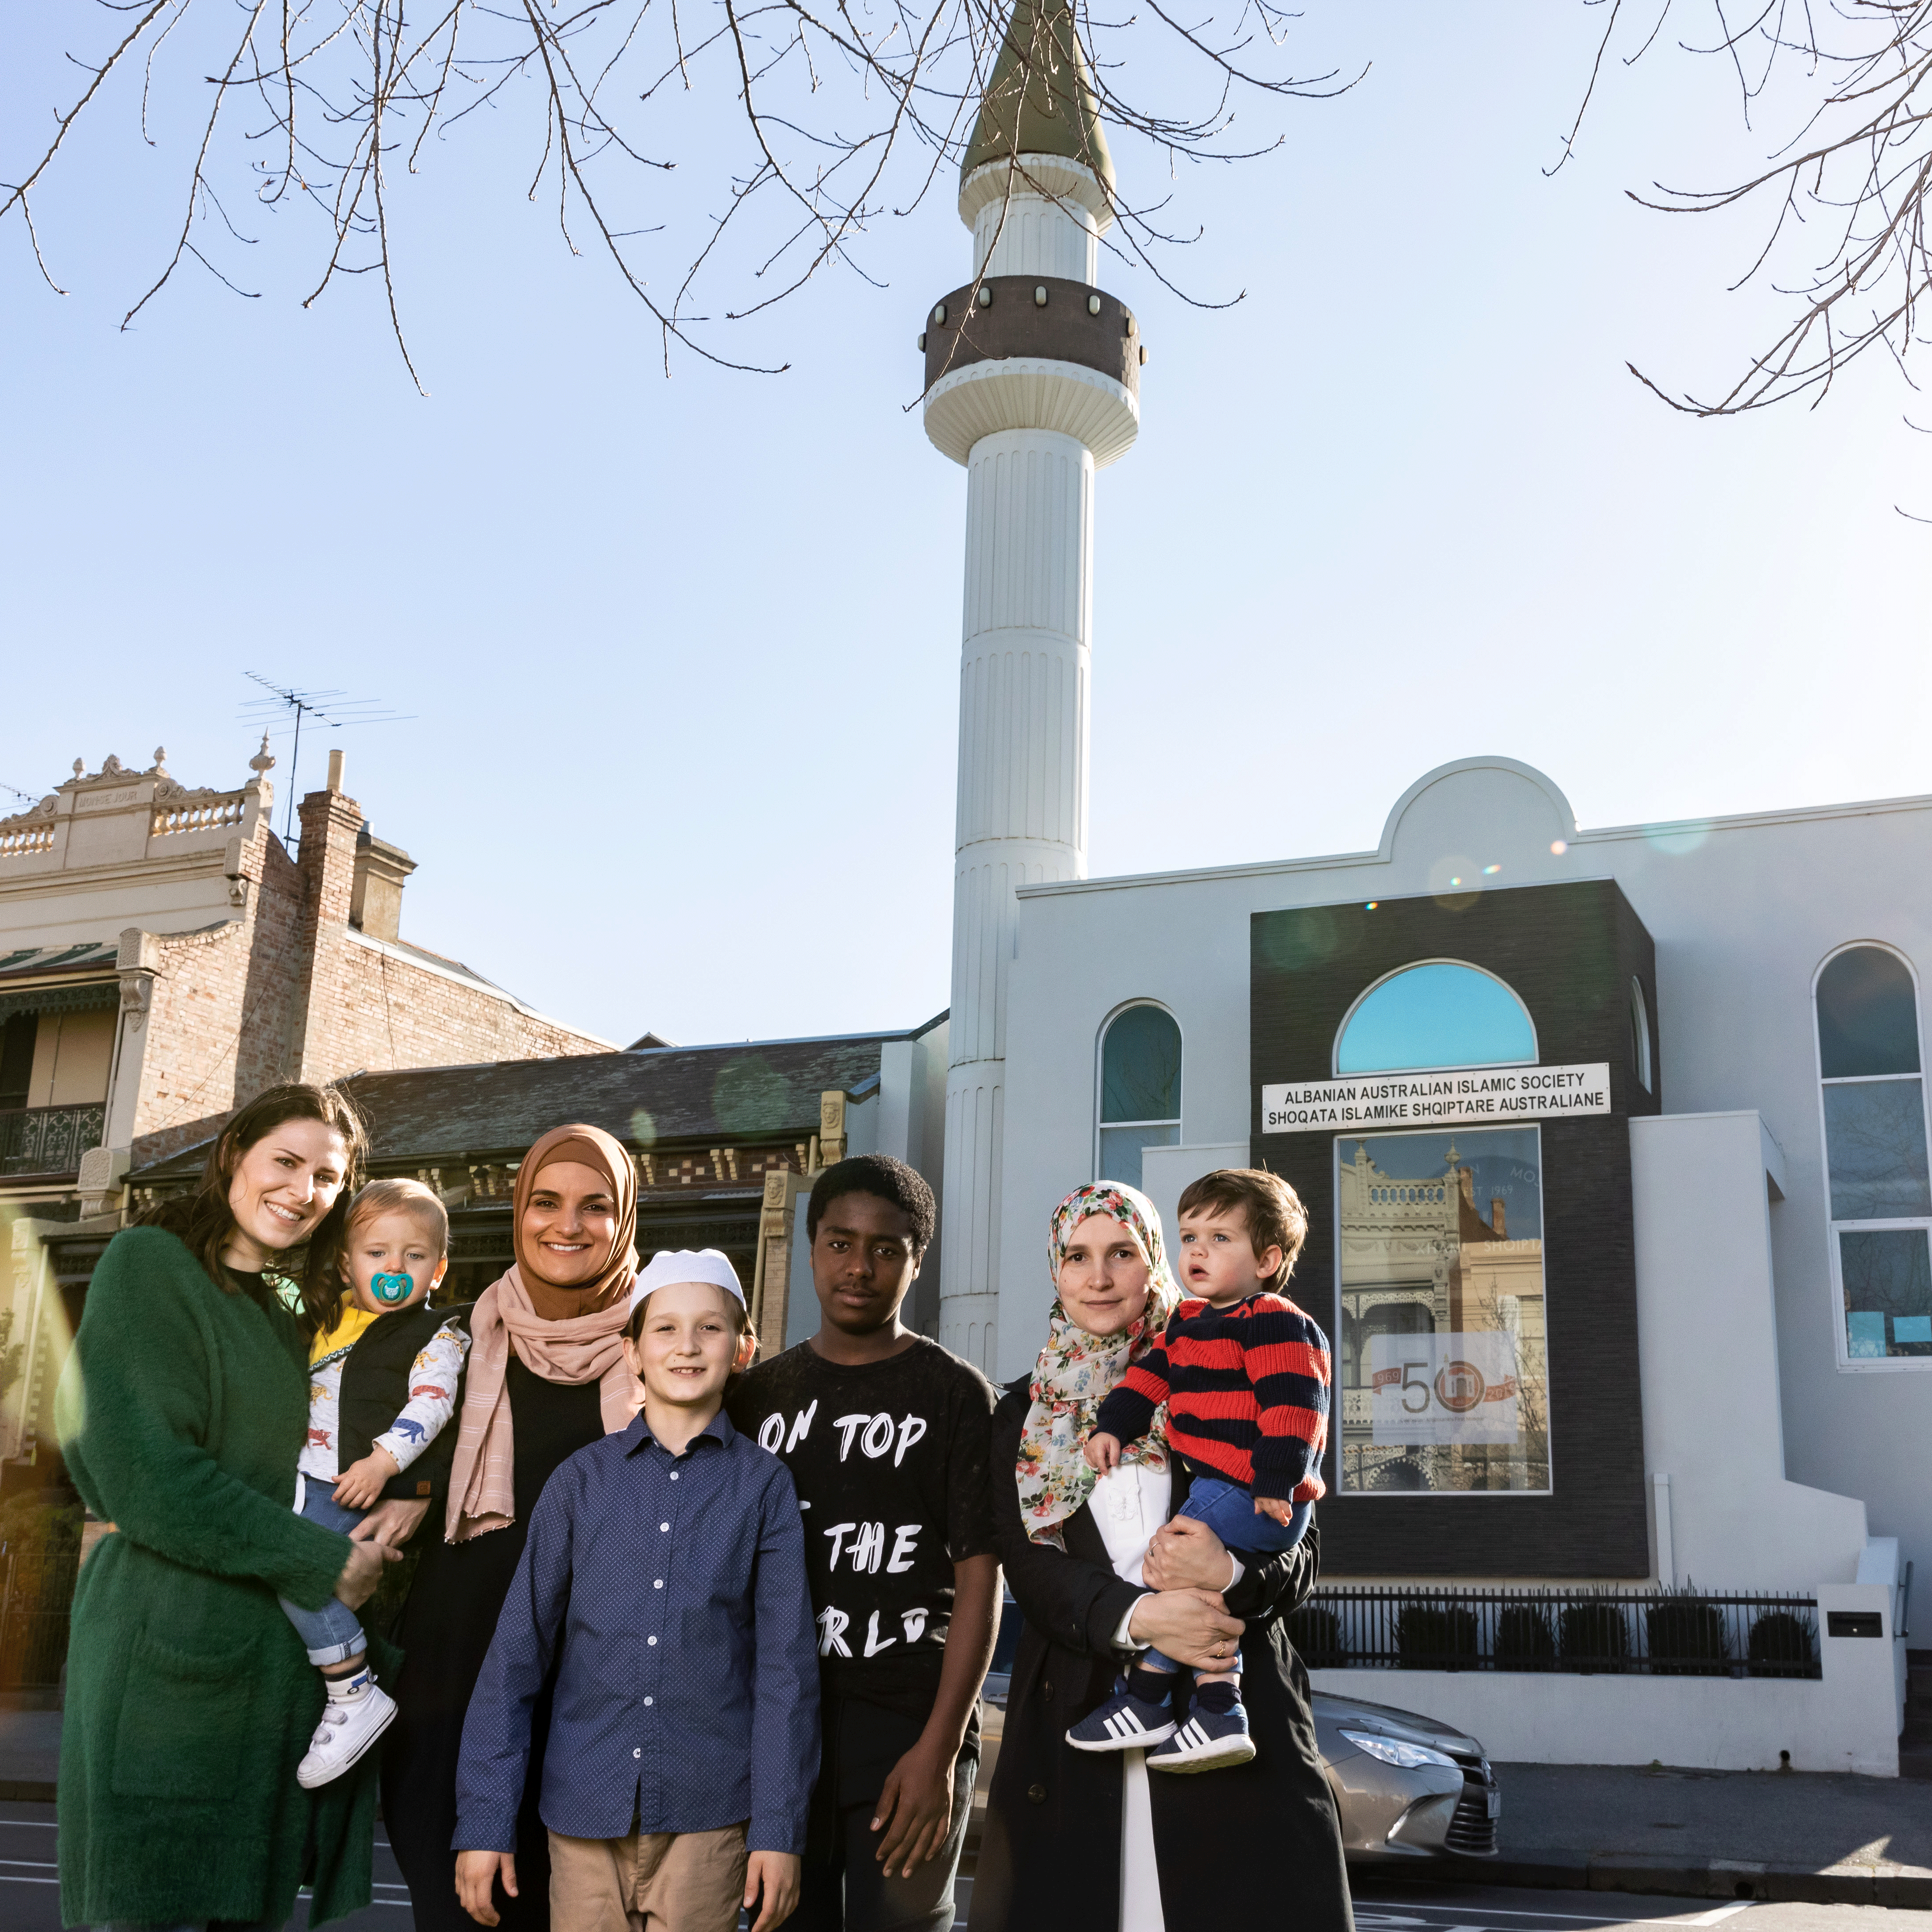 A group of women, young people and children stand outside in the sunshine in front of a white mosque 